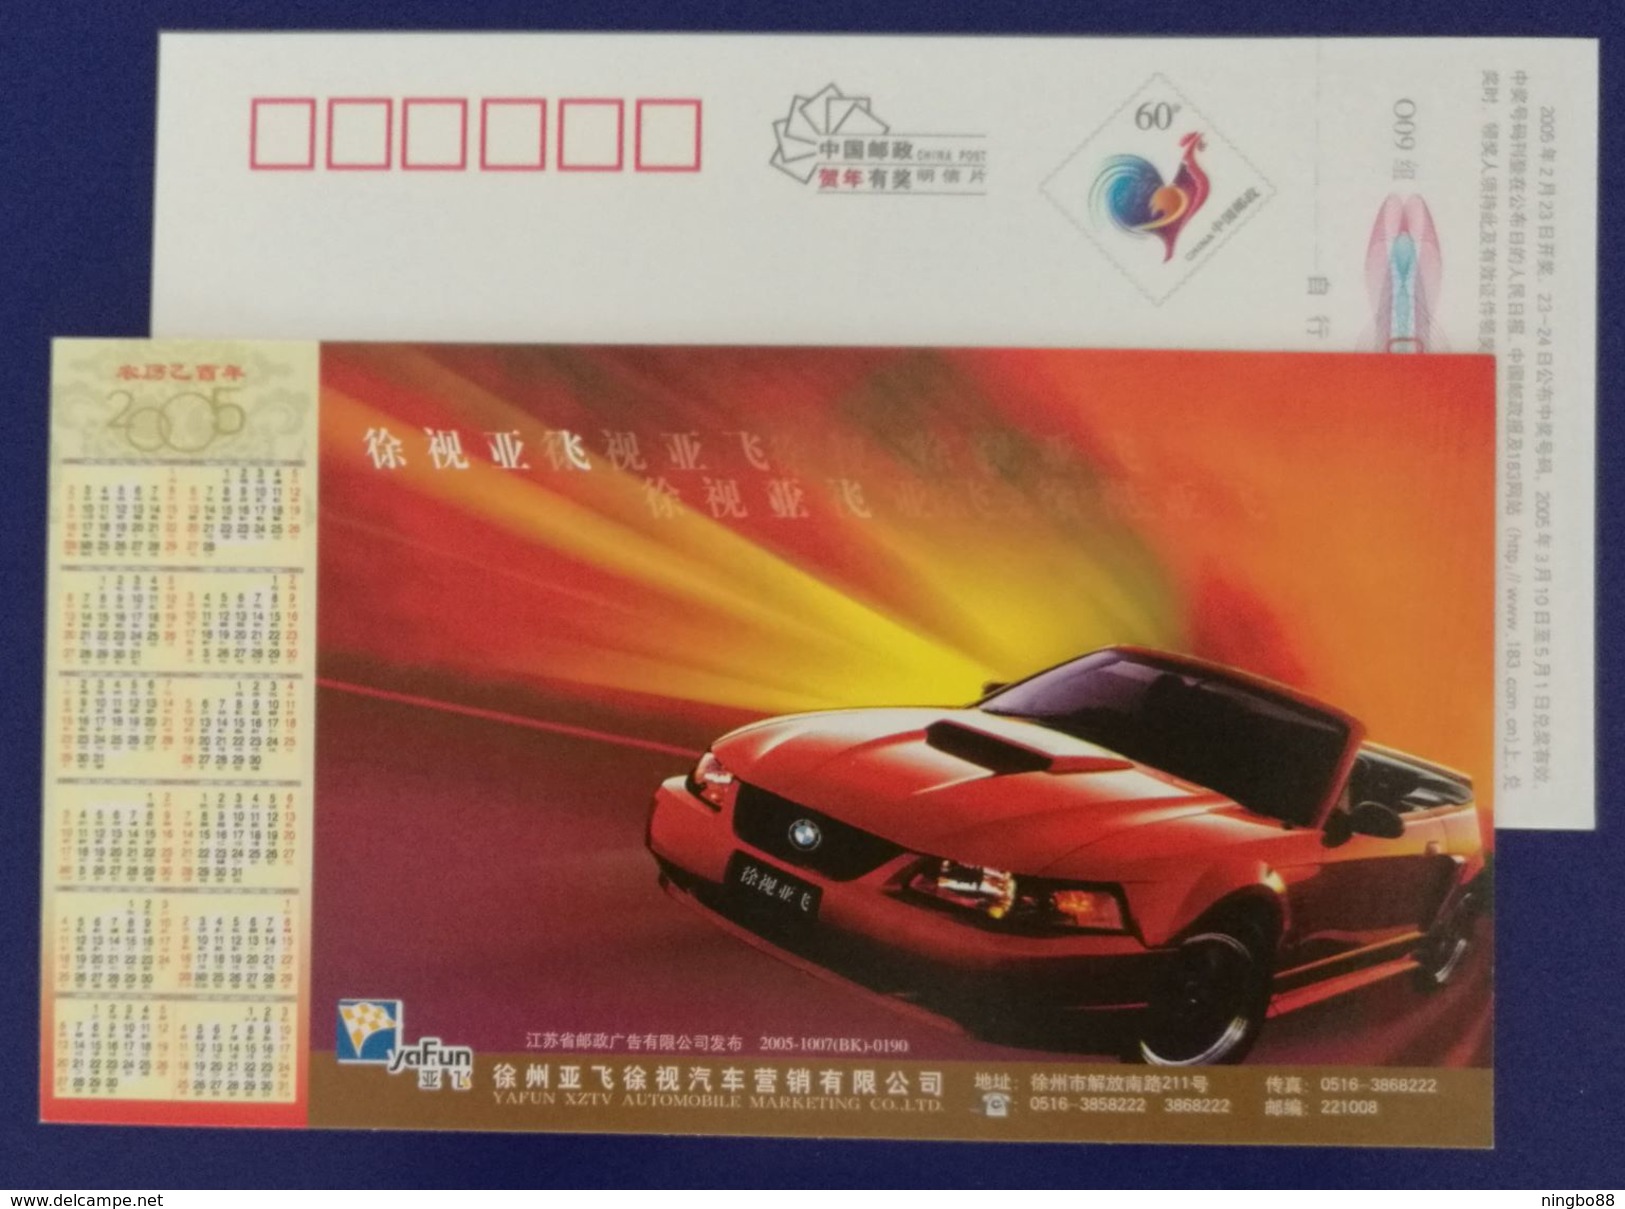 BMW Deluxe Convertible Car,China 2005 Xuzhou Automobile Marketing Company Advertising Pre-stamped Card - Cars